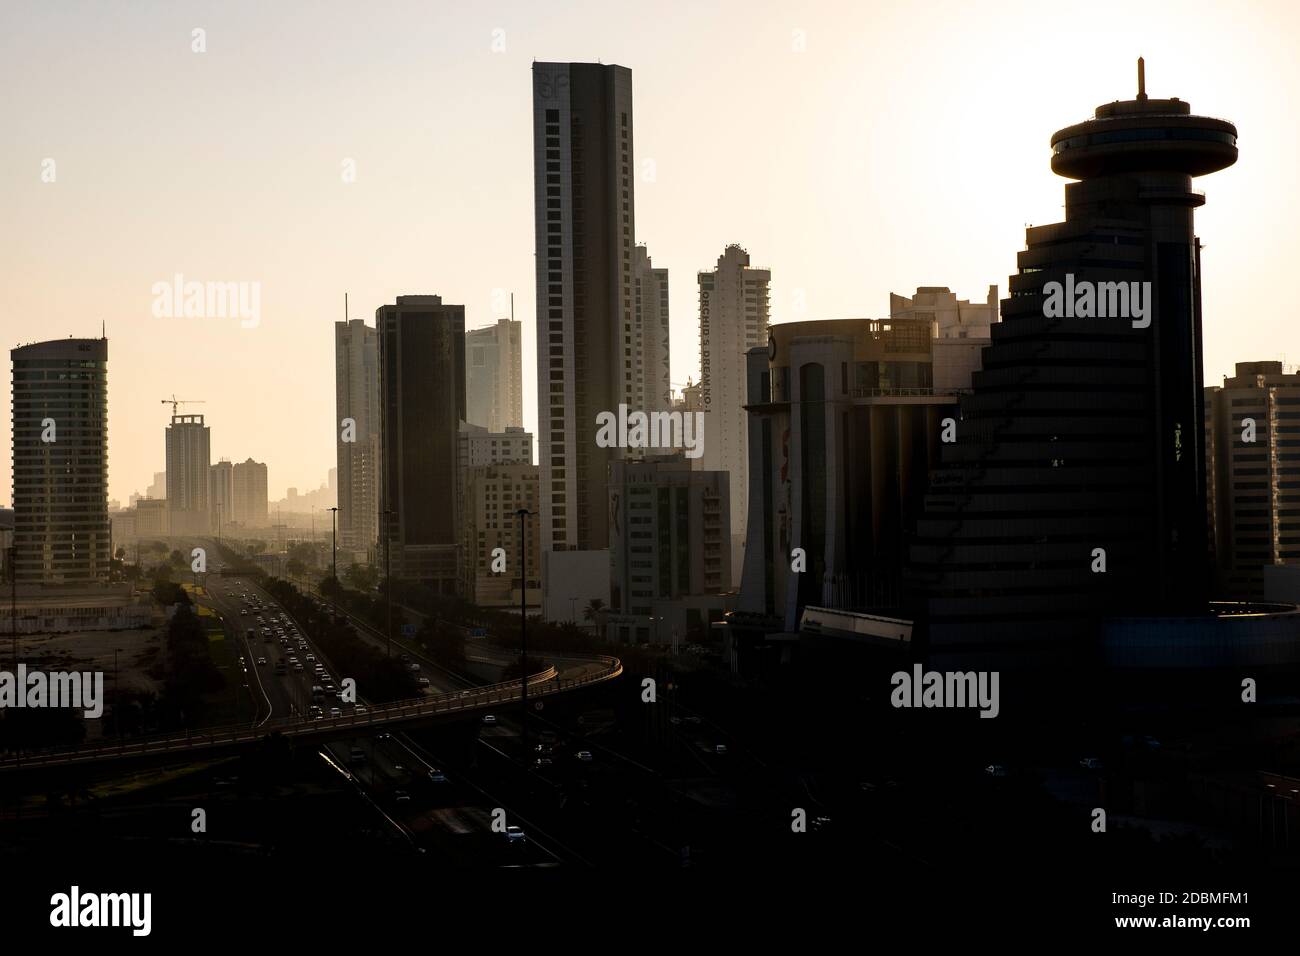 Bahrain Chamber of Commerce and Industry (BCCI) in Manama, Bahrain at sunrise Stock Photo